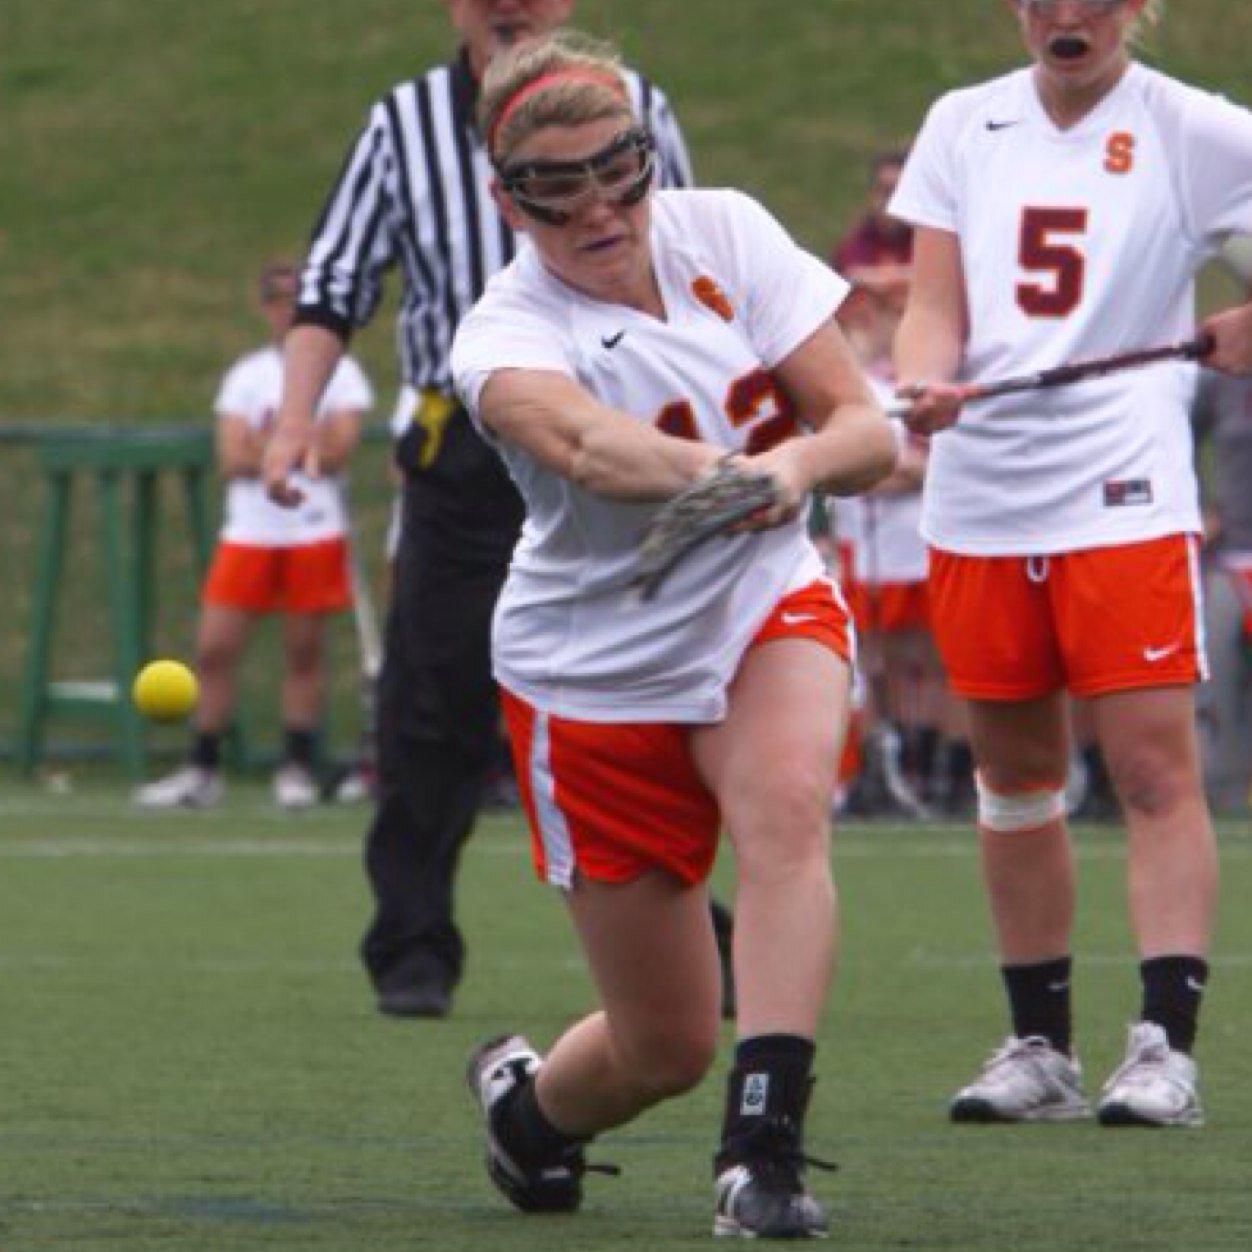 Susquehanna Women's Lacrosse is on the road to victory in the 2014 season!